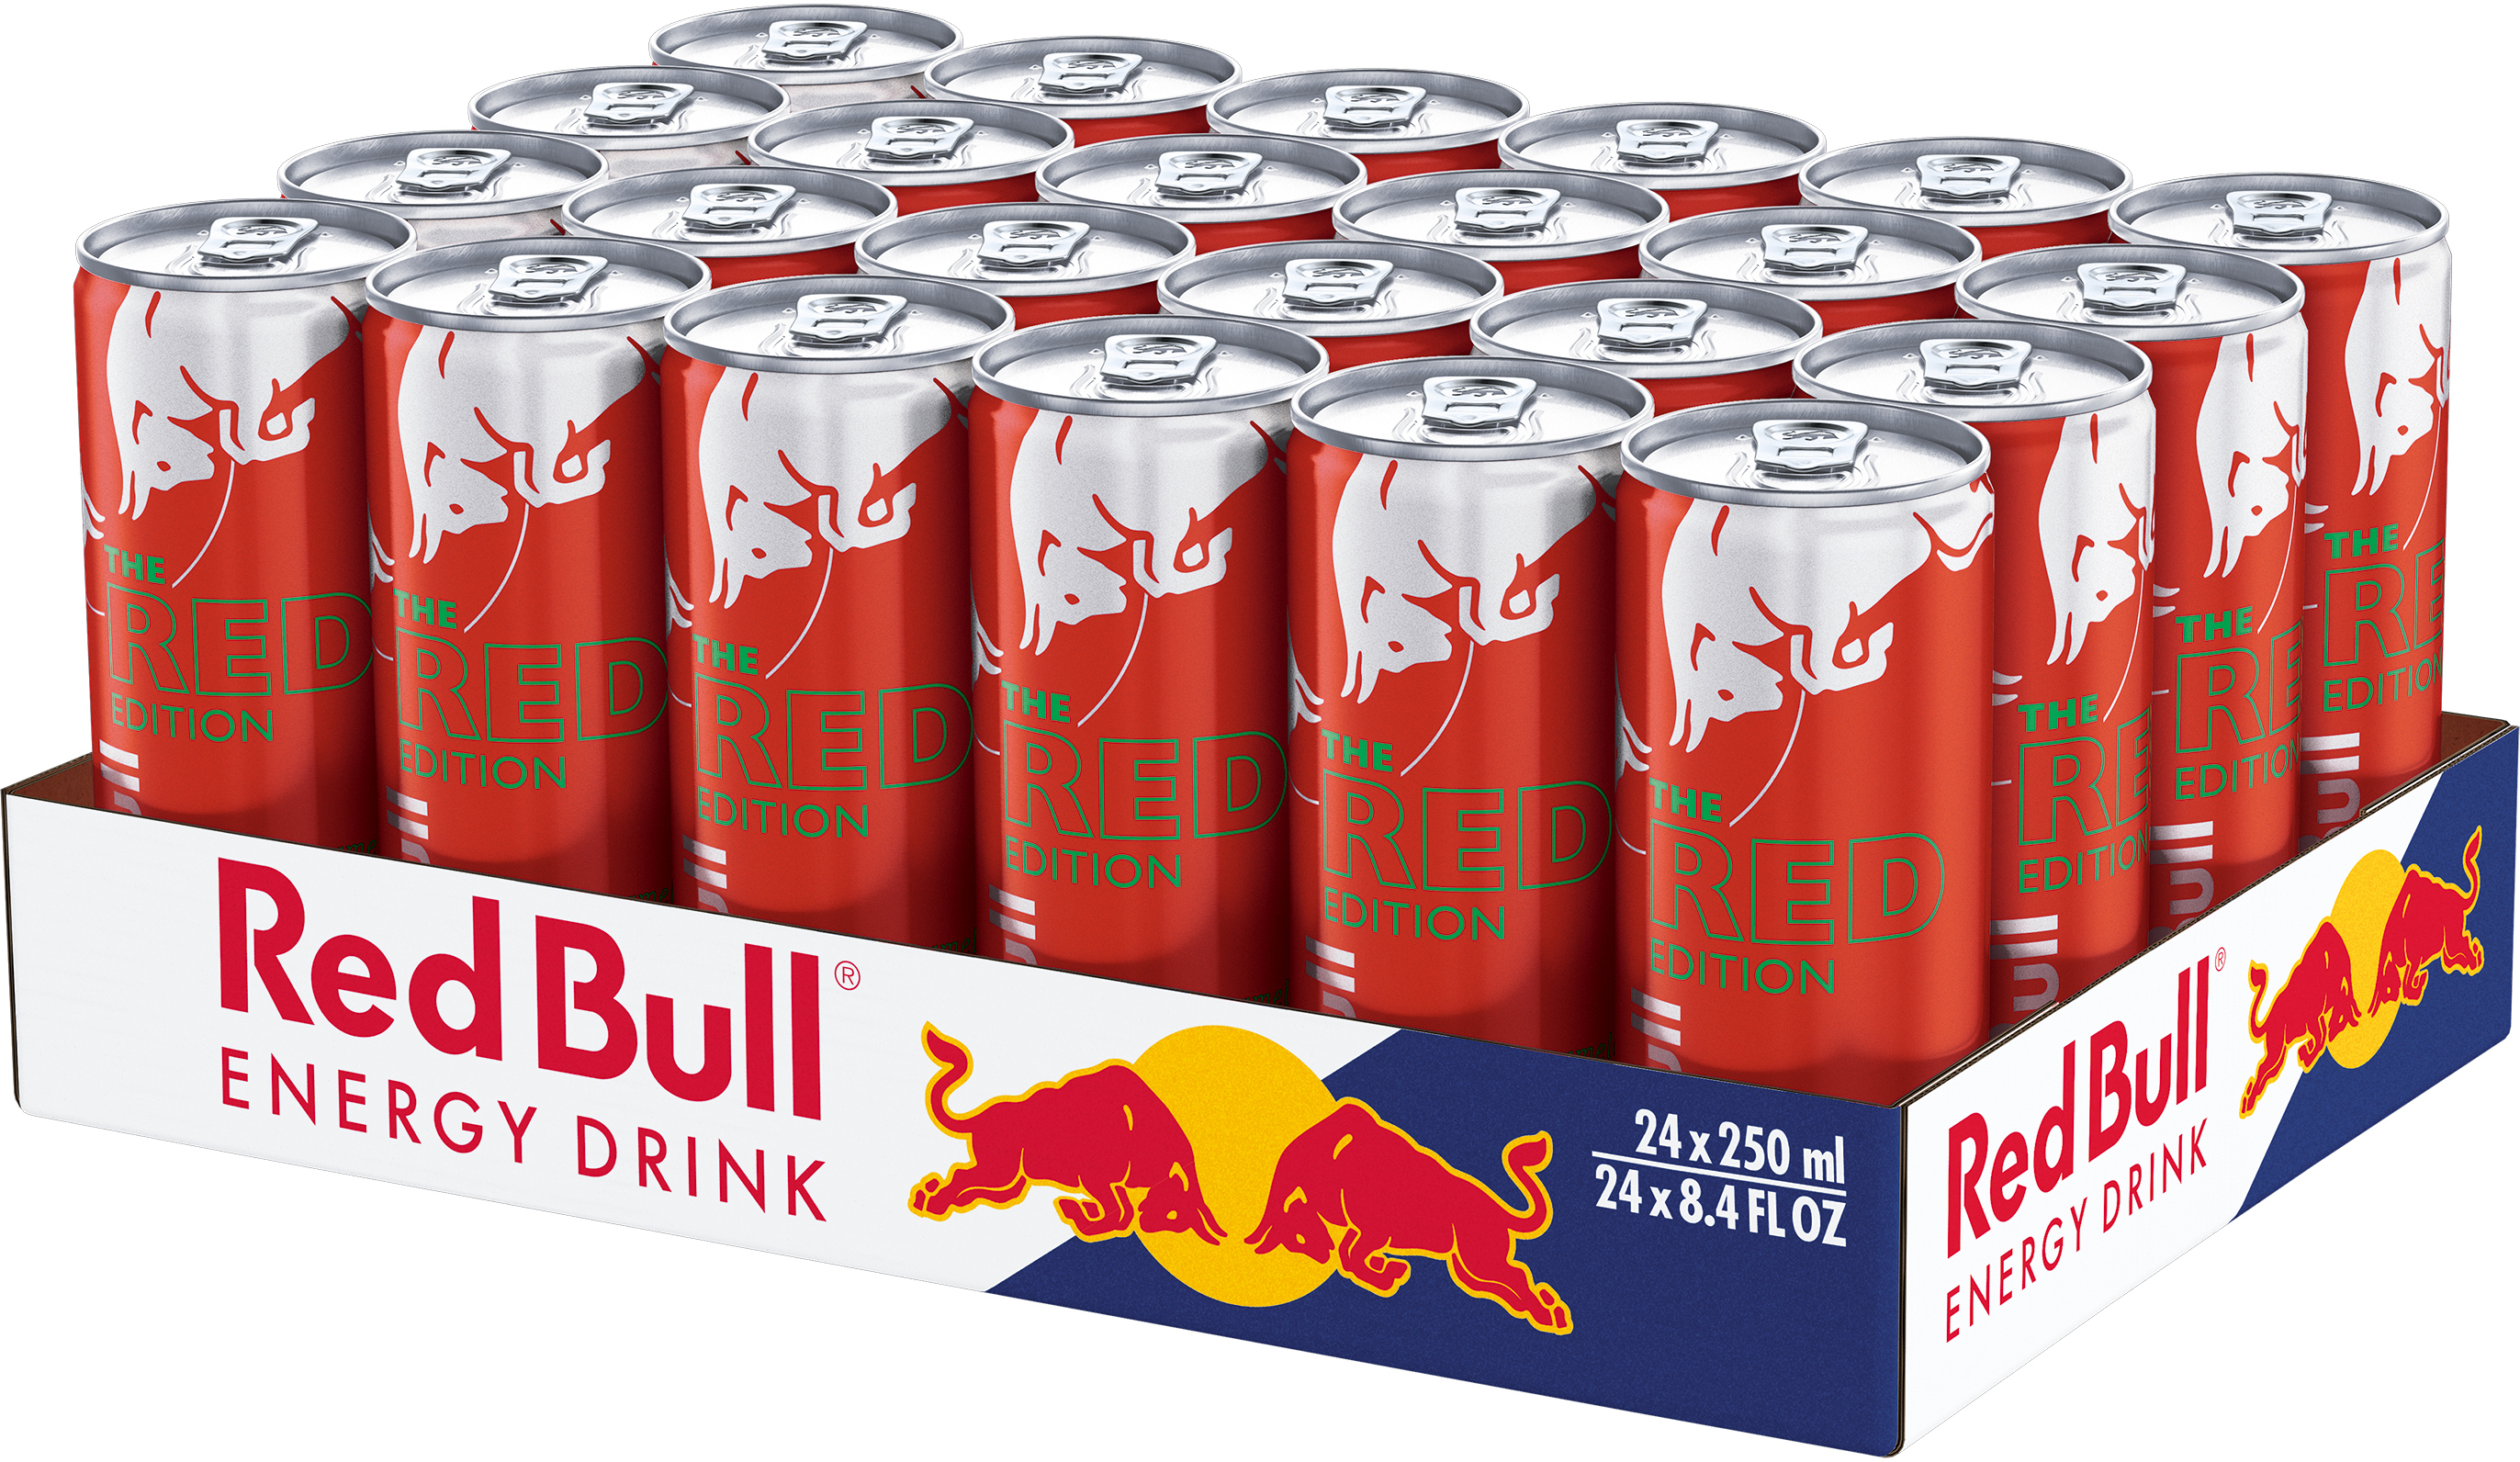 RED BULL Energy Drink Alu 7378 Red Edition 25 cl, 24 pcs.